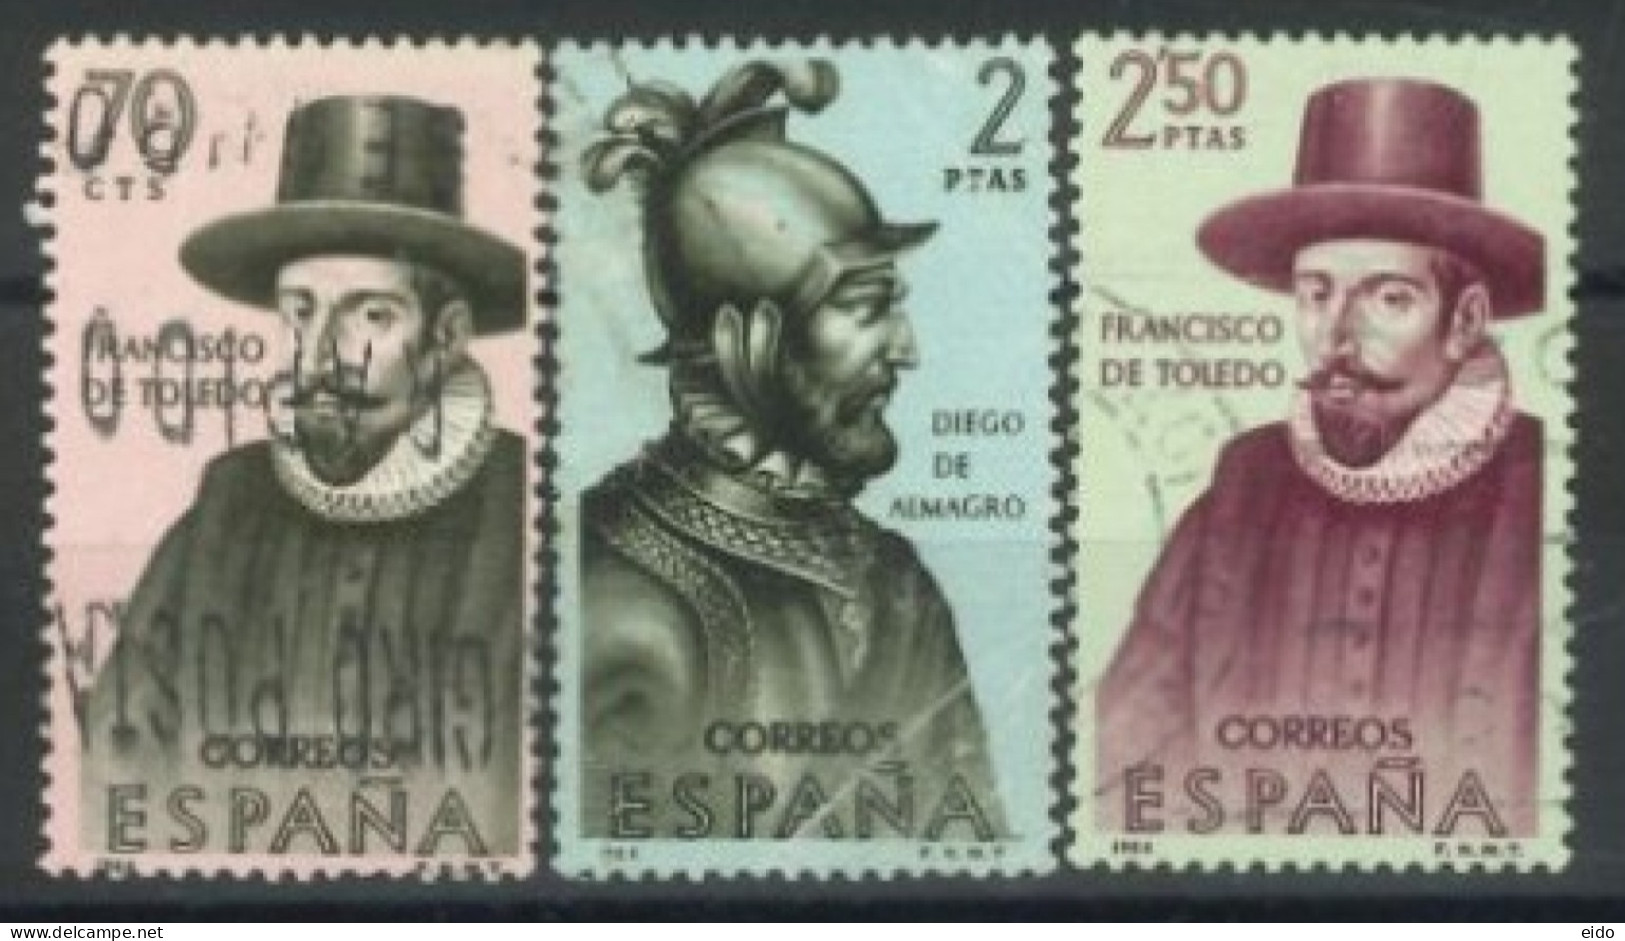 SPAIN, 1964, BUILDERS OF THE NEW WORLD STAMPS SET OF 3, # 1272,1274,& 1276, USED. - Usati